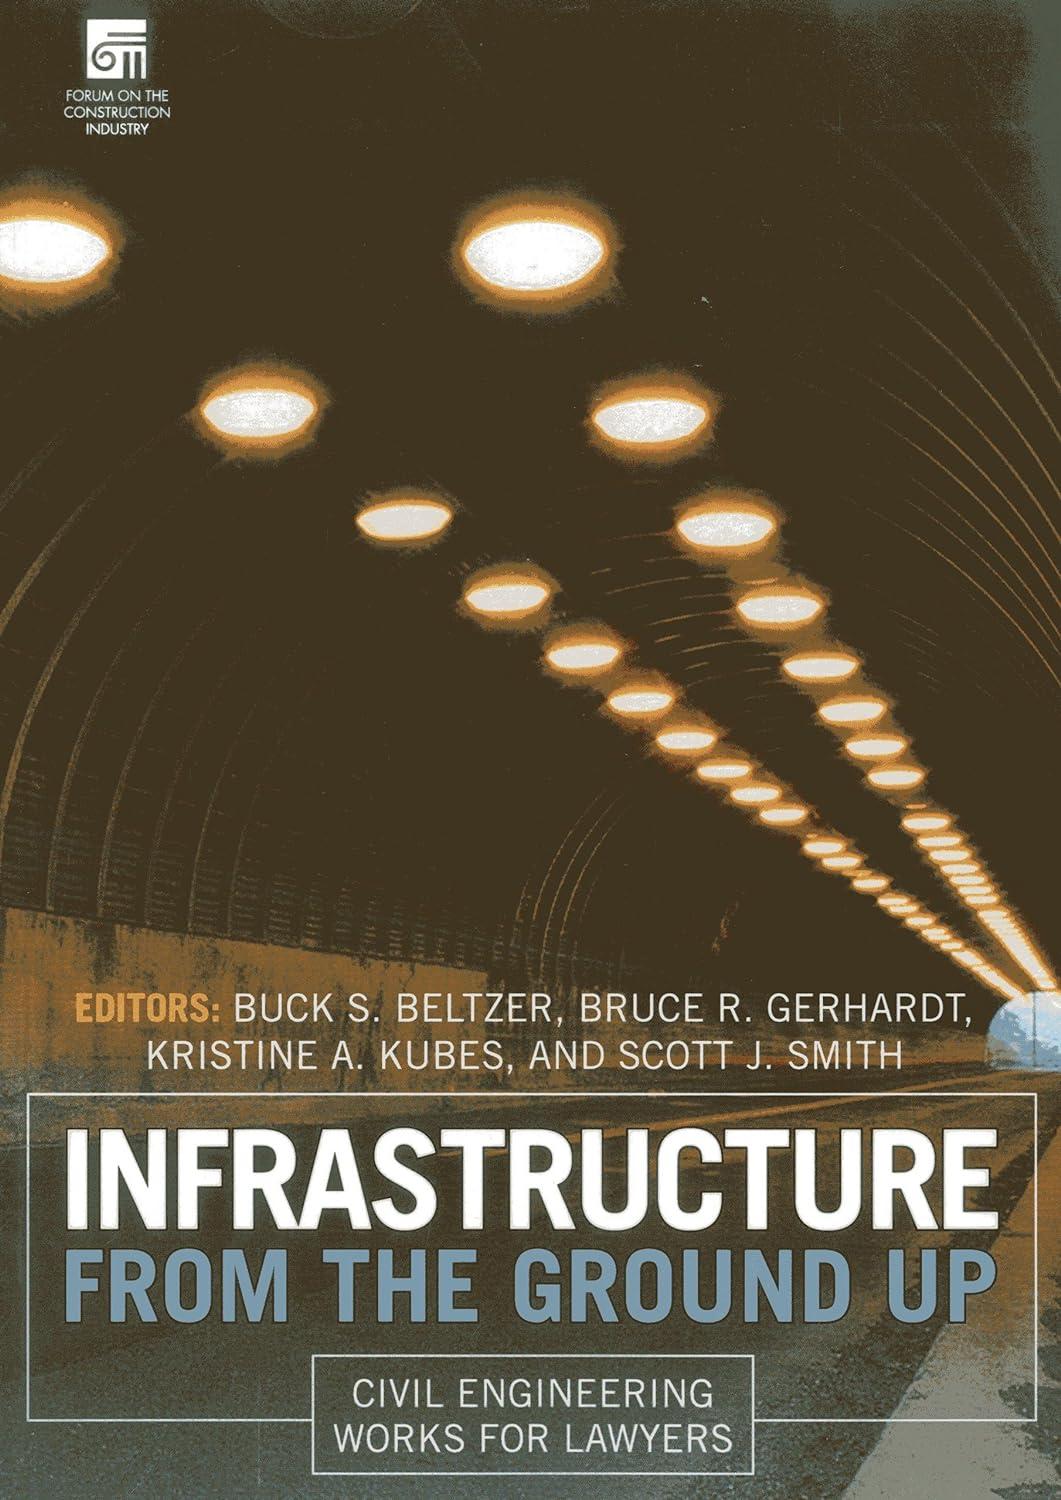 infrastructure from the ground up civil engineering works for lawyers 1st edition buck s. beltzer, bruce r.